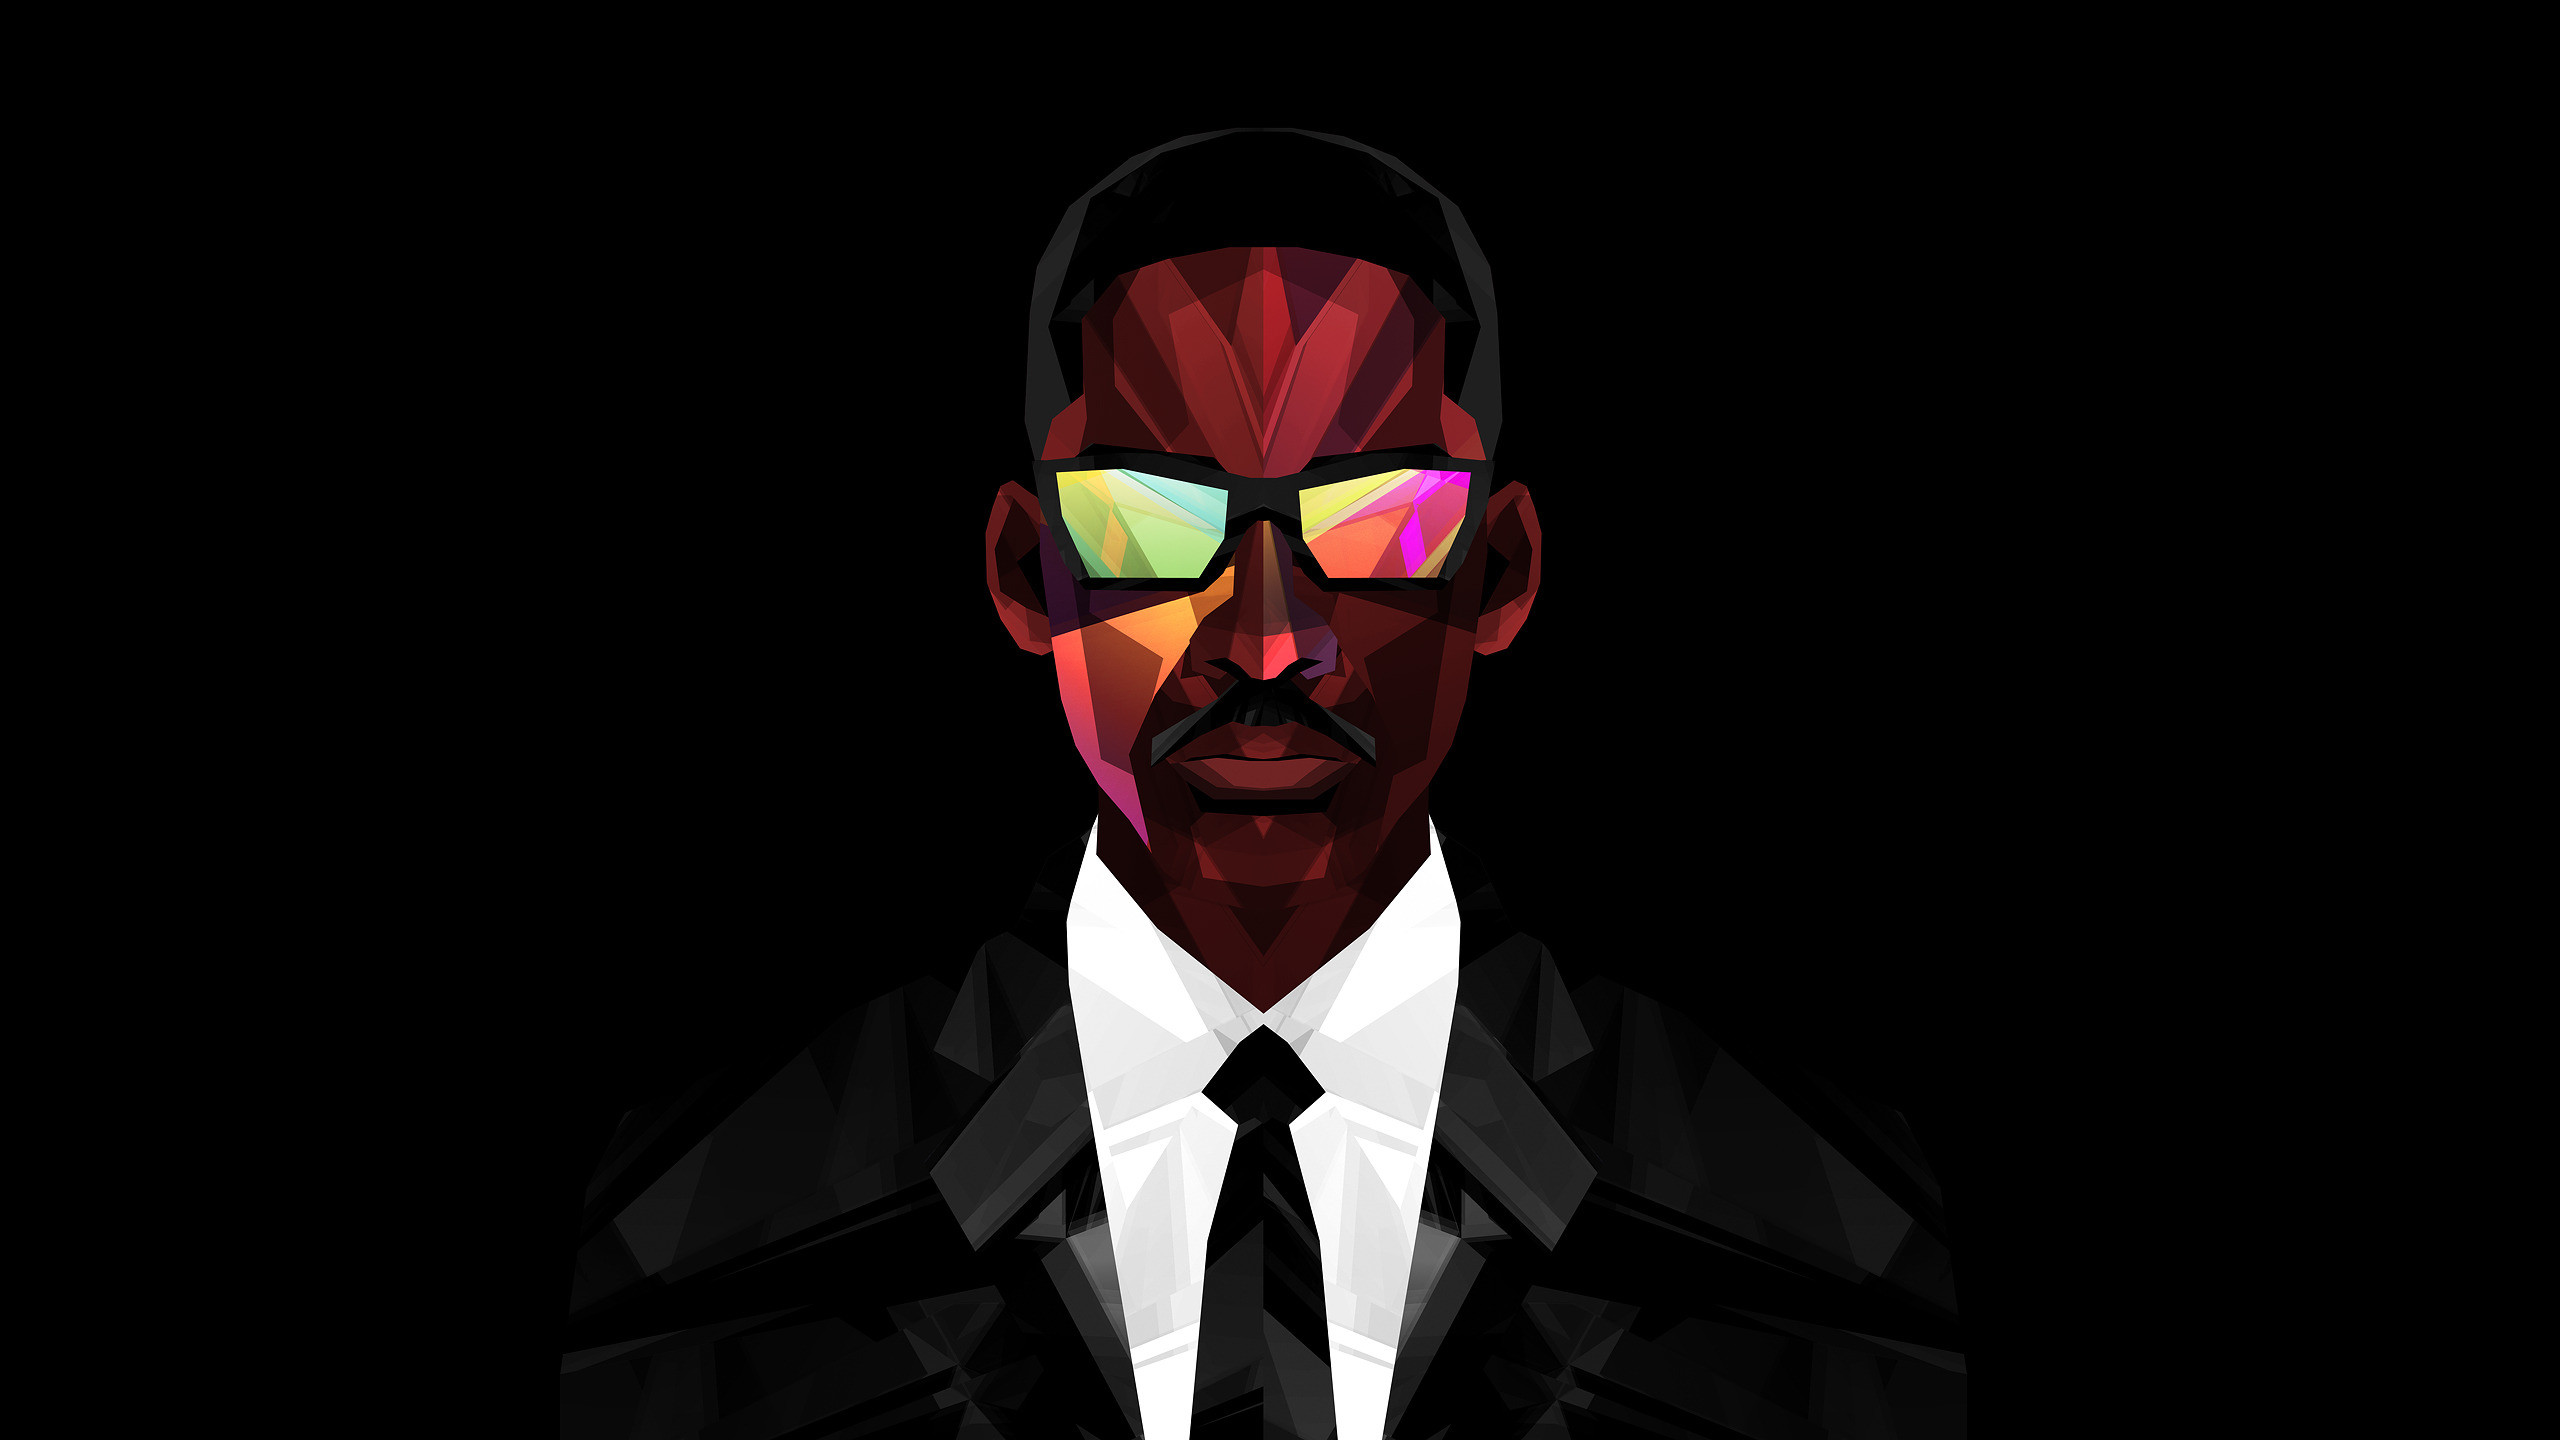 2560x1440 iPhone Low Poly Men in Black Will Smith - Wallpaper | iPhone Wallpapers  Black | Pinterest | Low poly and Wallpaper